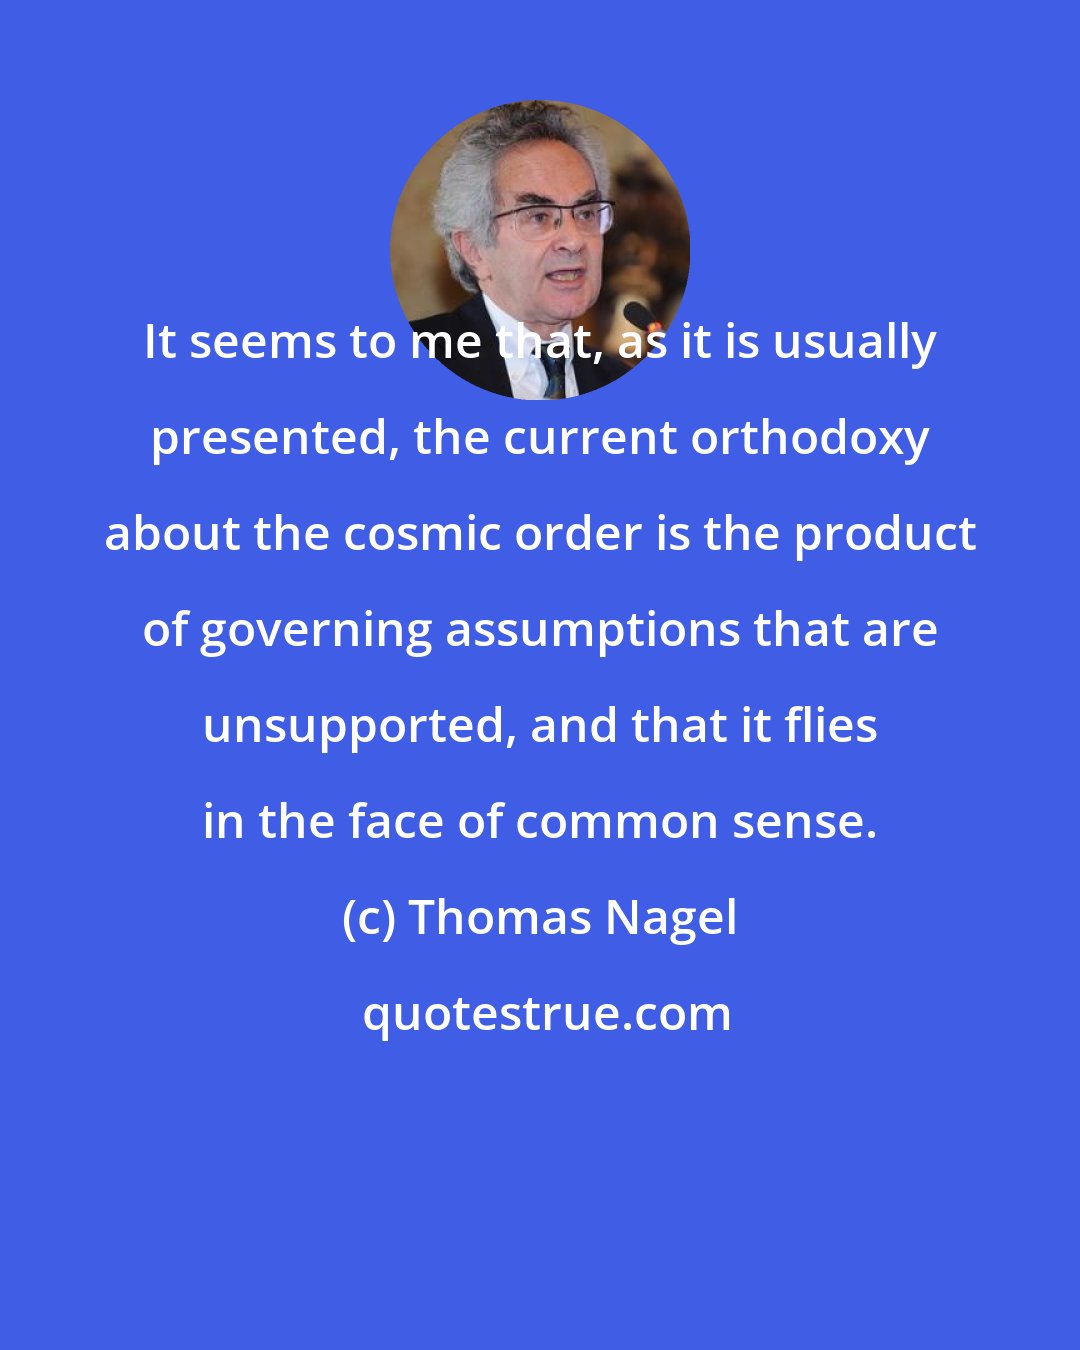 Thomas Nagel: It seems to me that, as it is usually presented, the current orthodoxy about the cosmic order is the product of governing assumptions that are unsupported, and that it flies in the face of common sense.